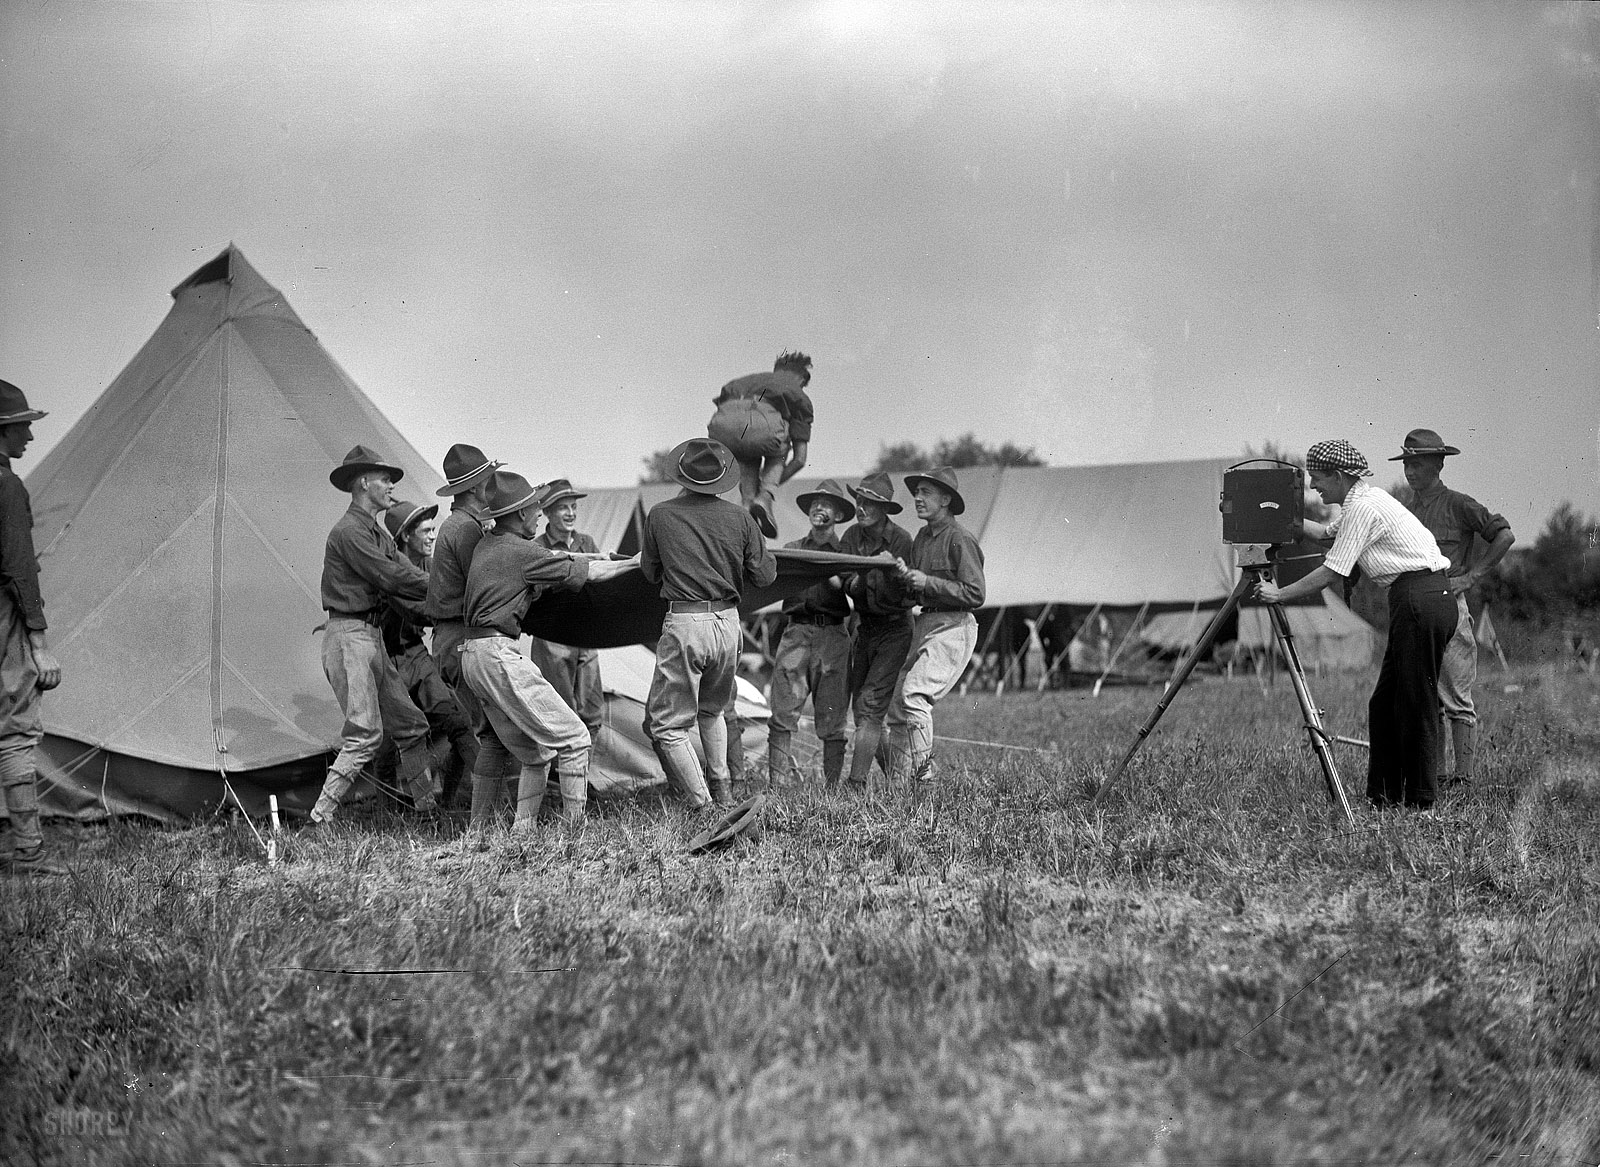 1915. "National Guard of D.C. -- Field tactics." Nothing like a blanket toss to confuse the enemy. Note the Hollywood type behind the movie camera. Harris & Ewing Collection glass negative, Library of Congress. View full size.